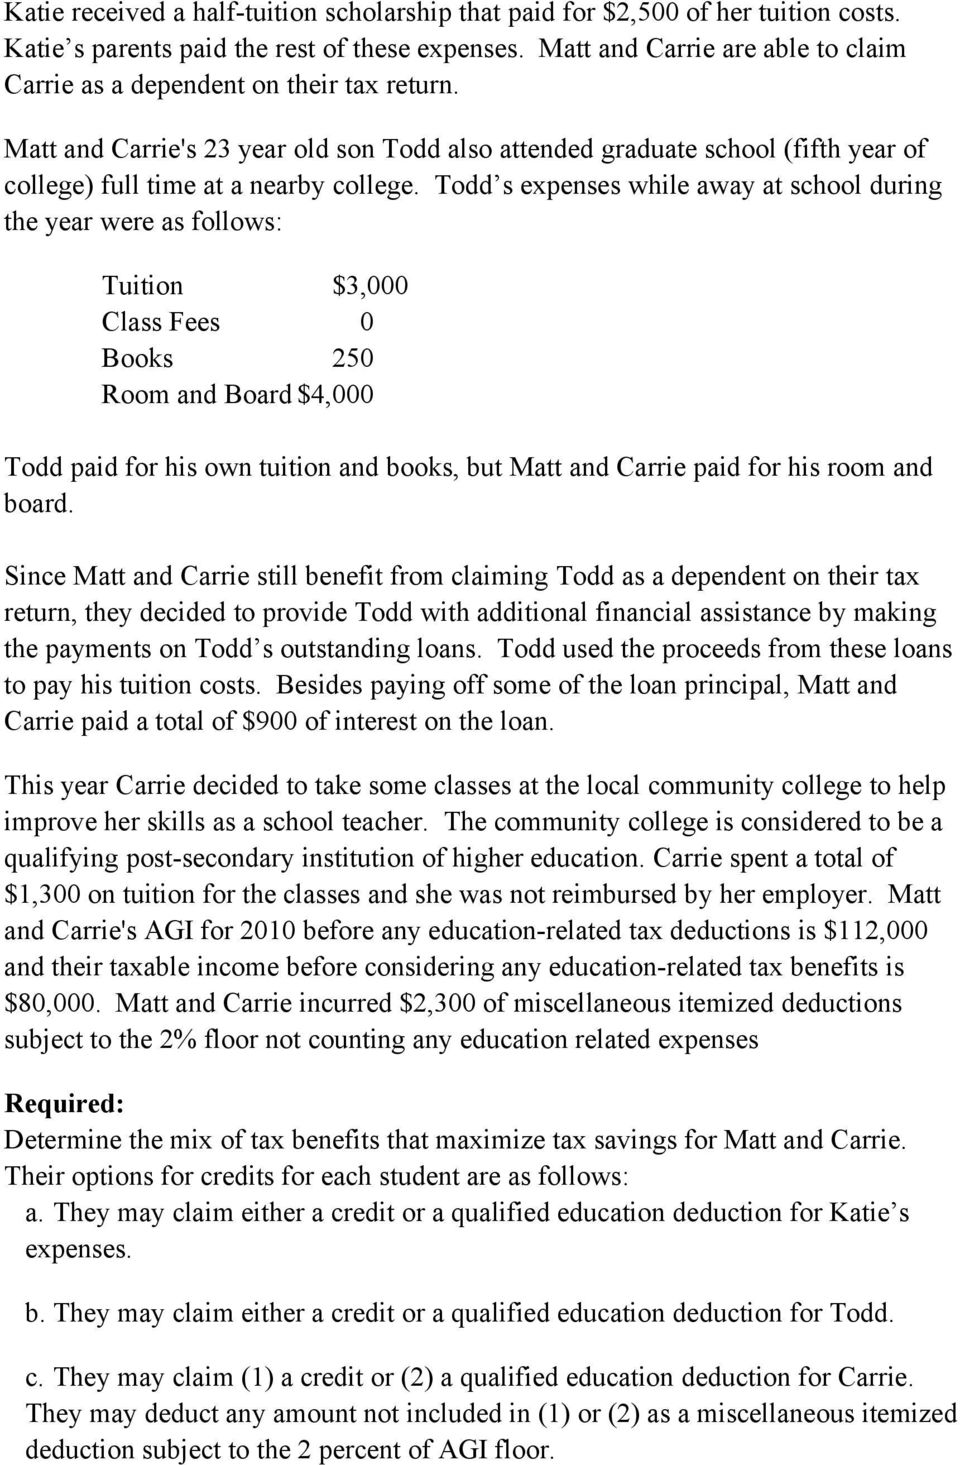 Todd s while away at school during the year were as follows: Tuition $3,000 Class Fees 0 Books 250 Room and Board $4,000 Todd paid for his own tuition and books, but Matt and Carrie paid for his room